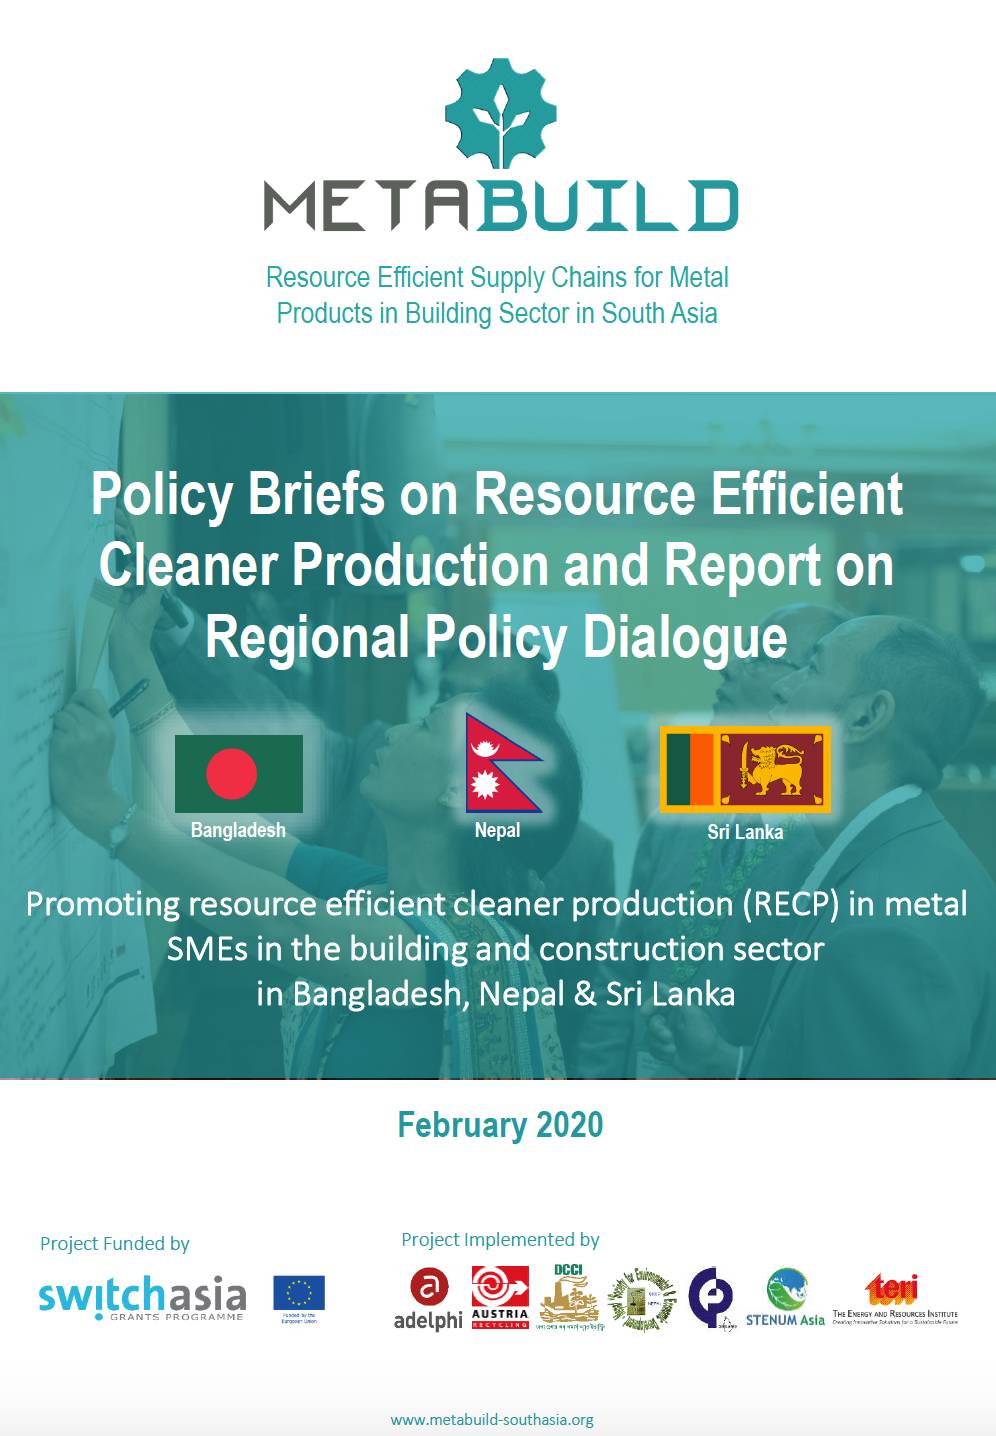 Policy Briefs on Resource Efficient Cleaner Production and Report on Regional Policy Dialogue